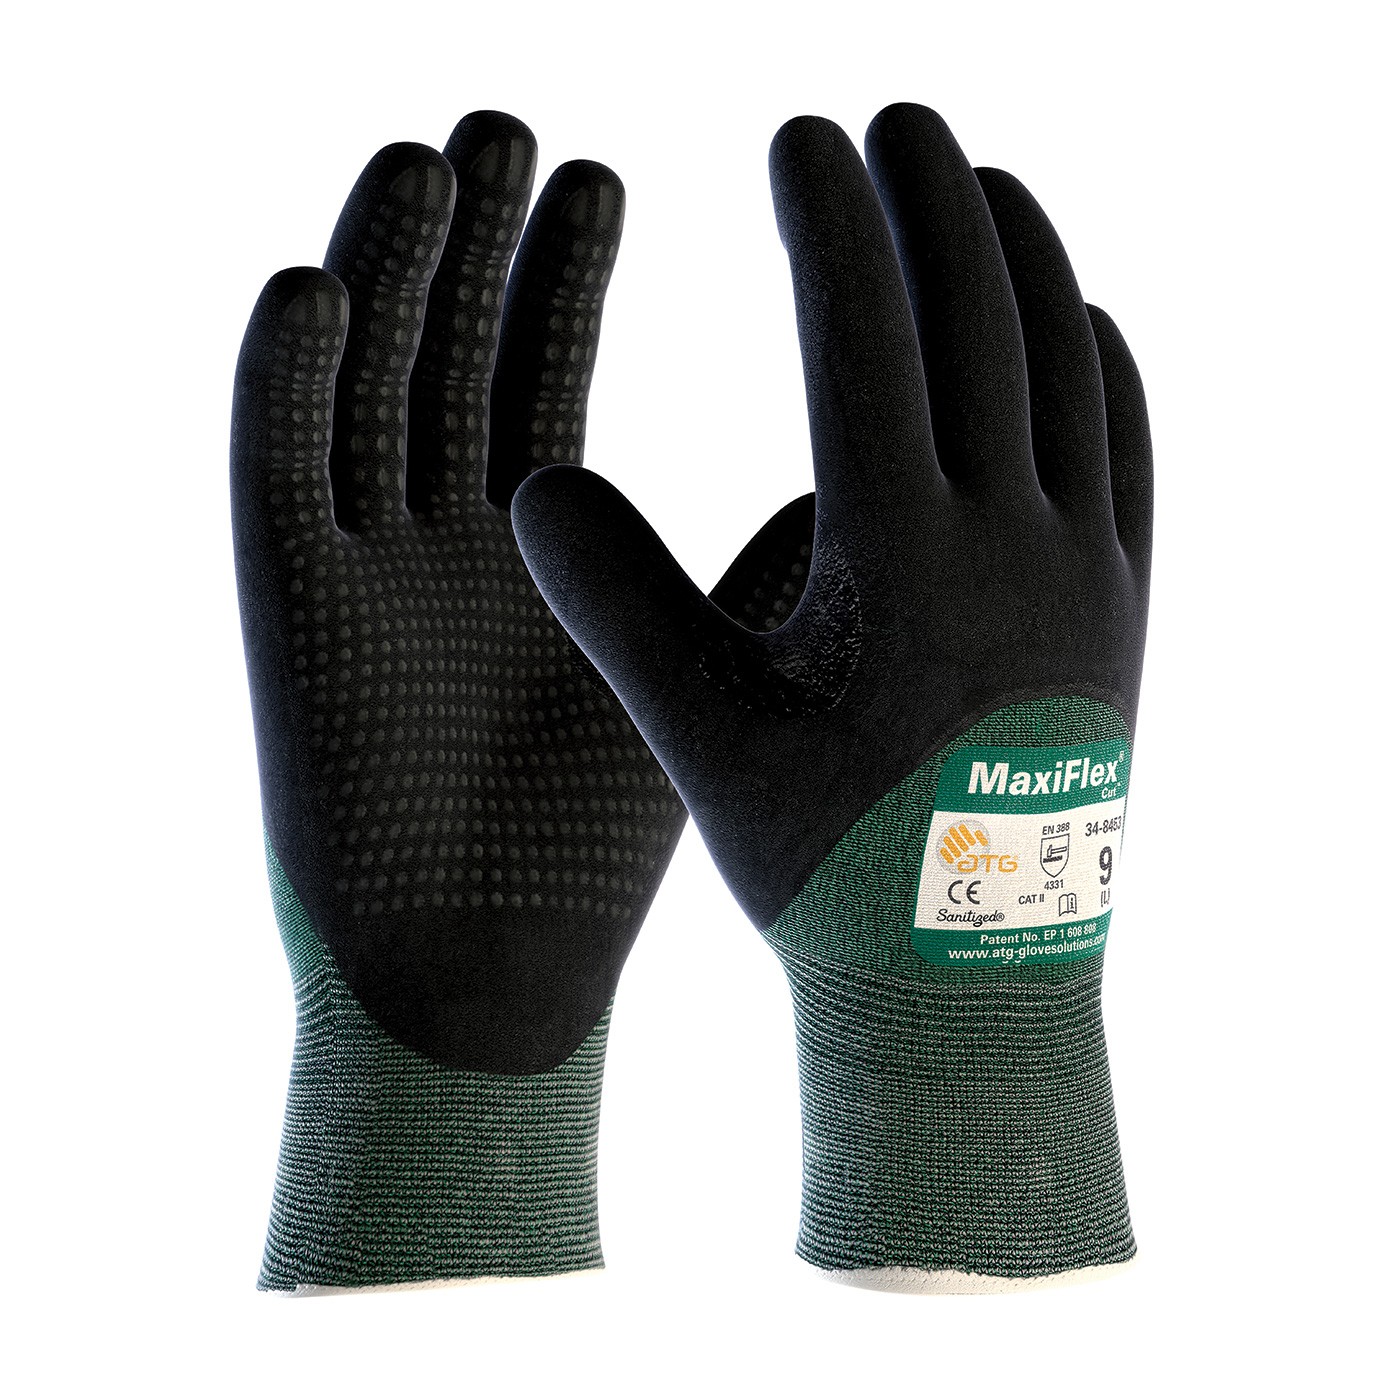 MaxiFlex® Cut™ Seamless Knit Engineered Yarn Glove with Premium Nitrile Coated MicroFoam Grip on Palm, Fingers & Knuckles - Micro Dot Palm (#34-8453)